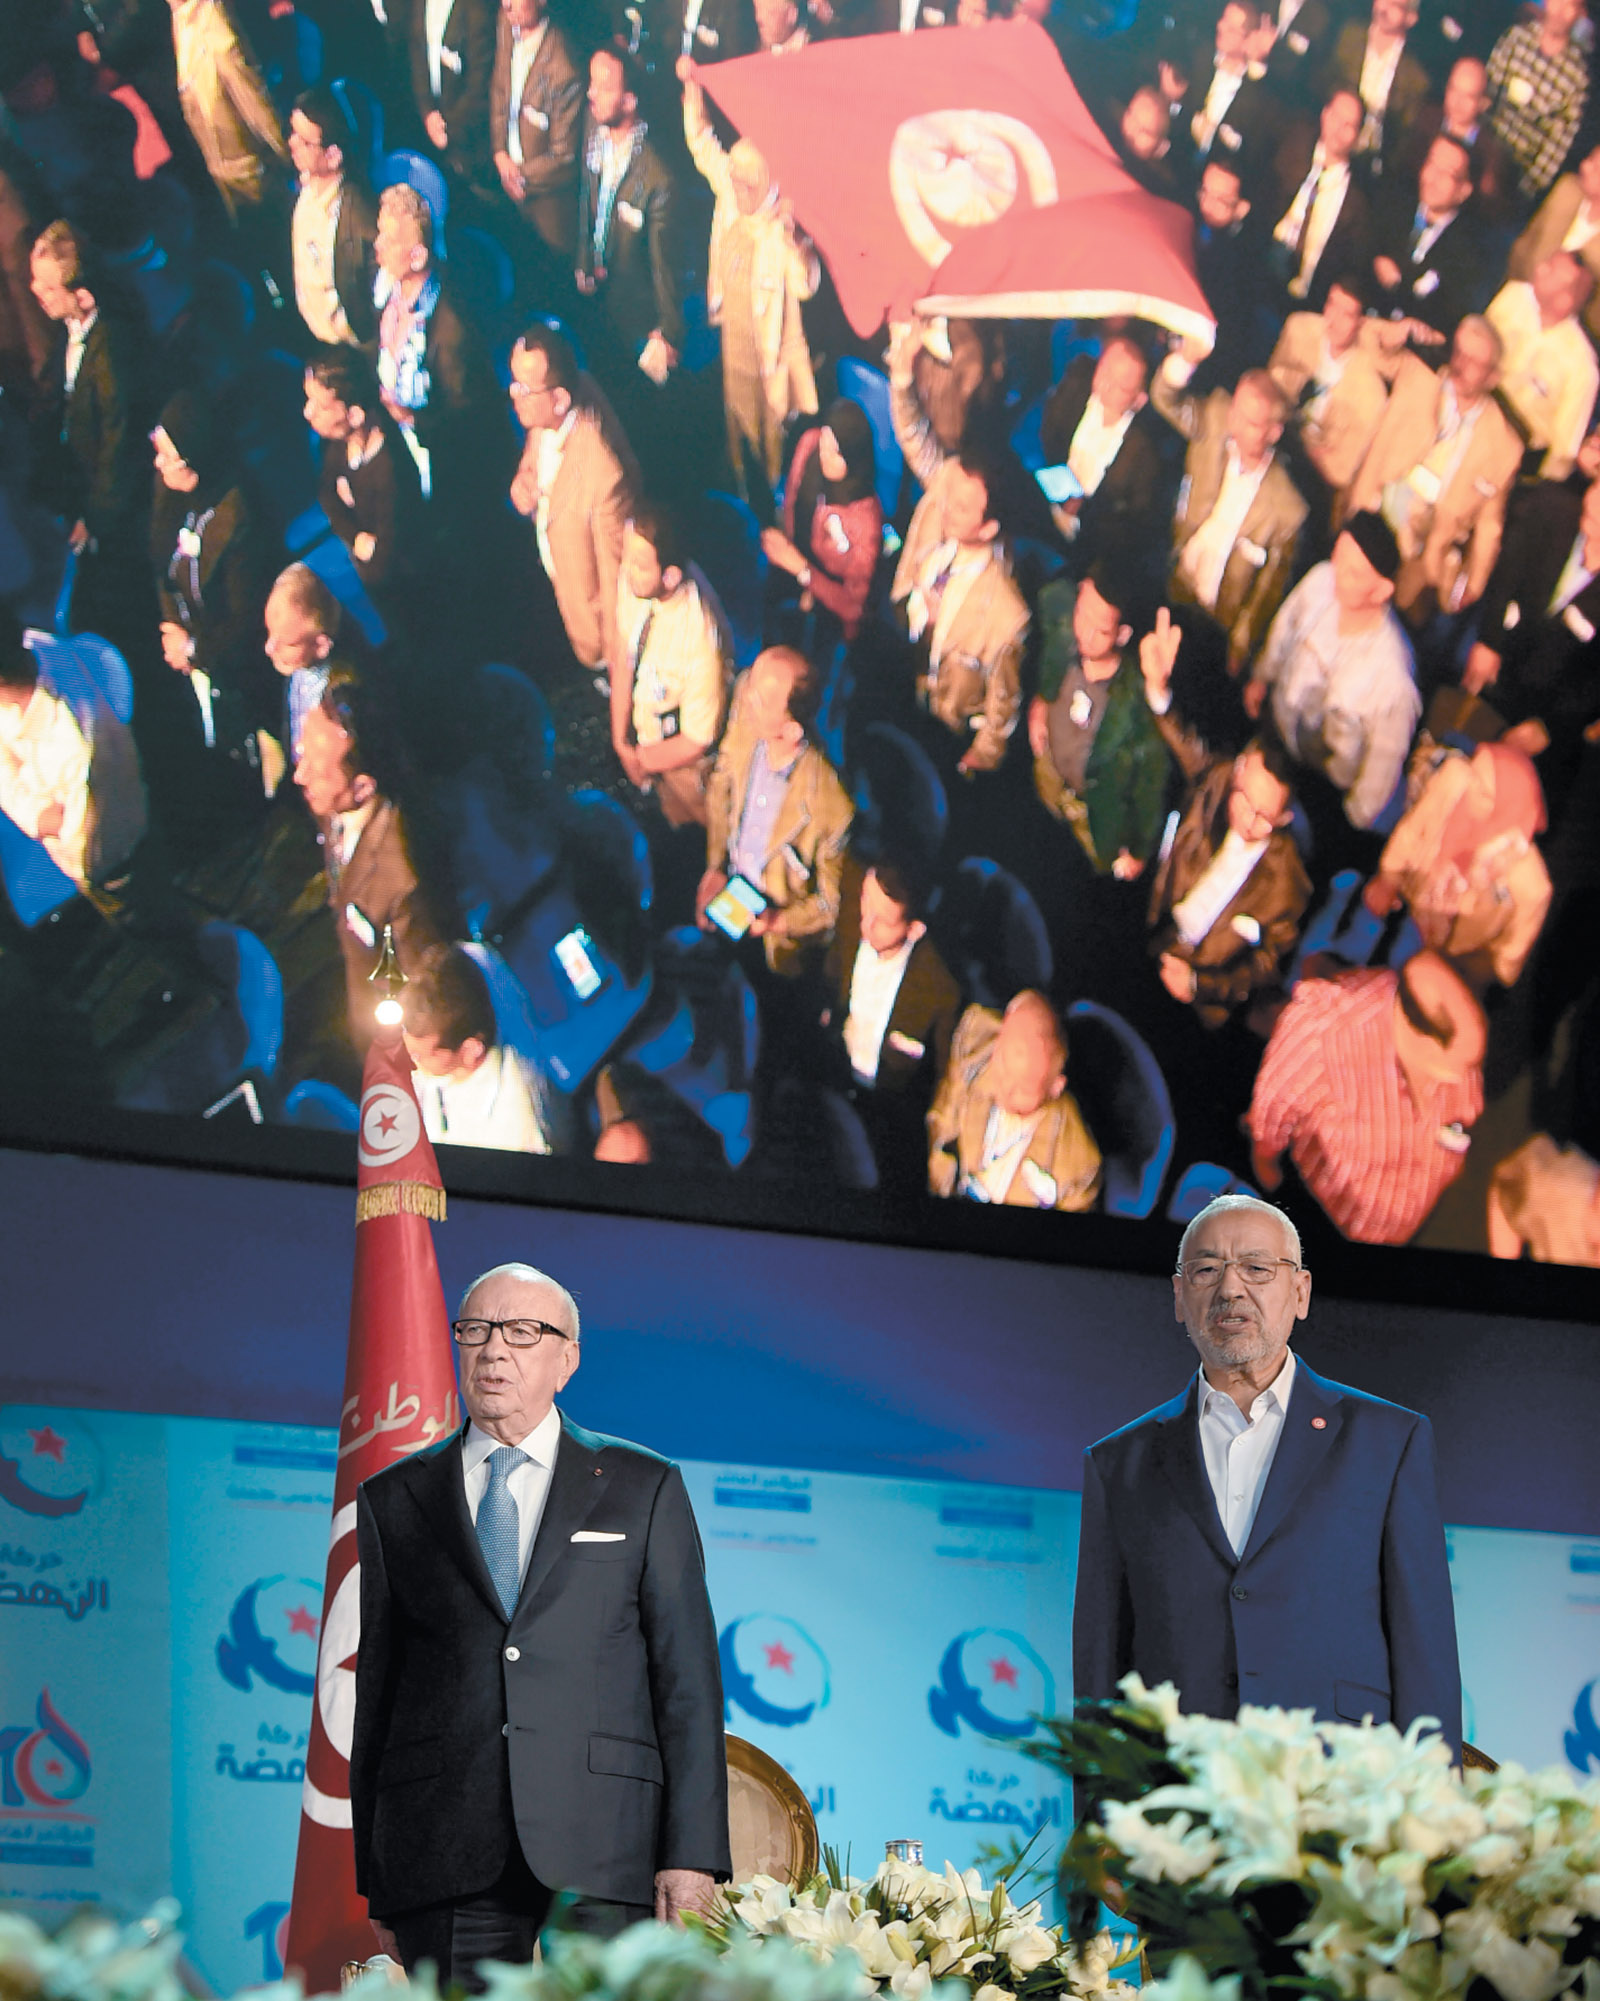 Tunisian President Beji Caid Essebsi and Islamist Ennahda Party leader Rachid Ghannouchi at the opening ceremony of Ennahda’s congress, Tunis, May 2016